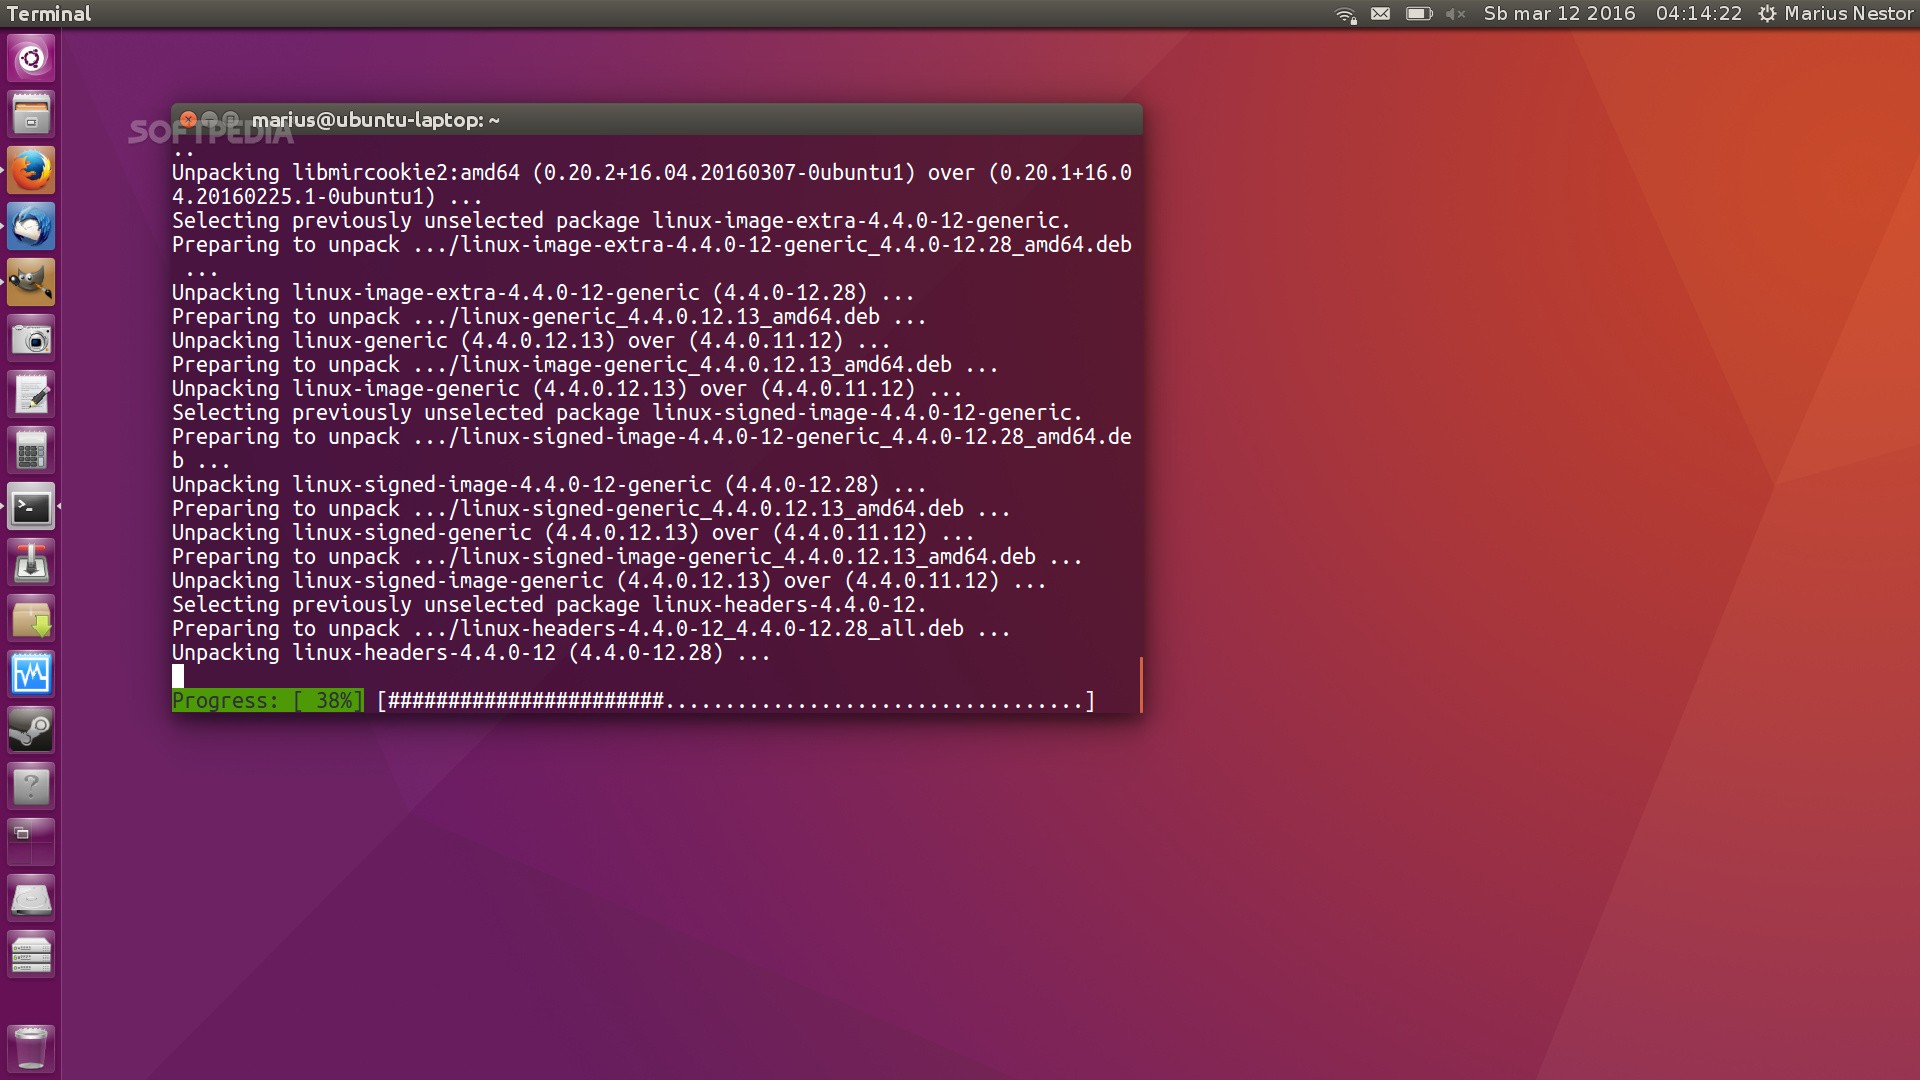 ubuntu-16-04-lts-now-ships-with-linux-kernel-4-4-4-lts-launches-april-21-2016-501644-2